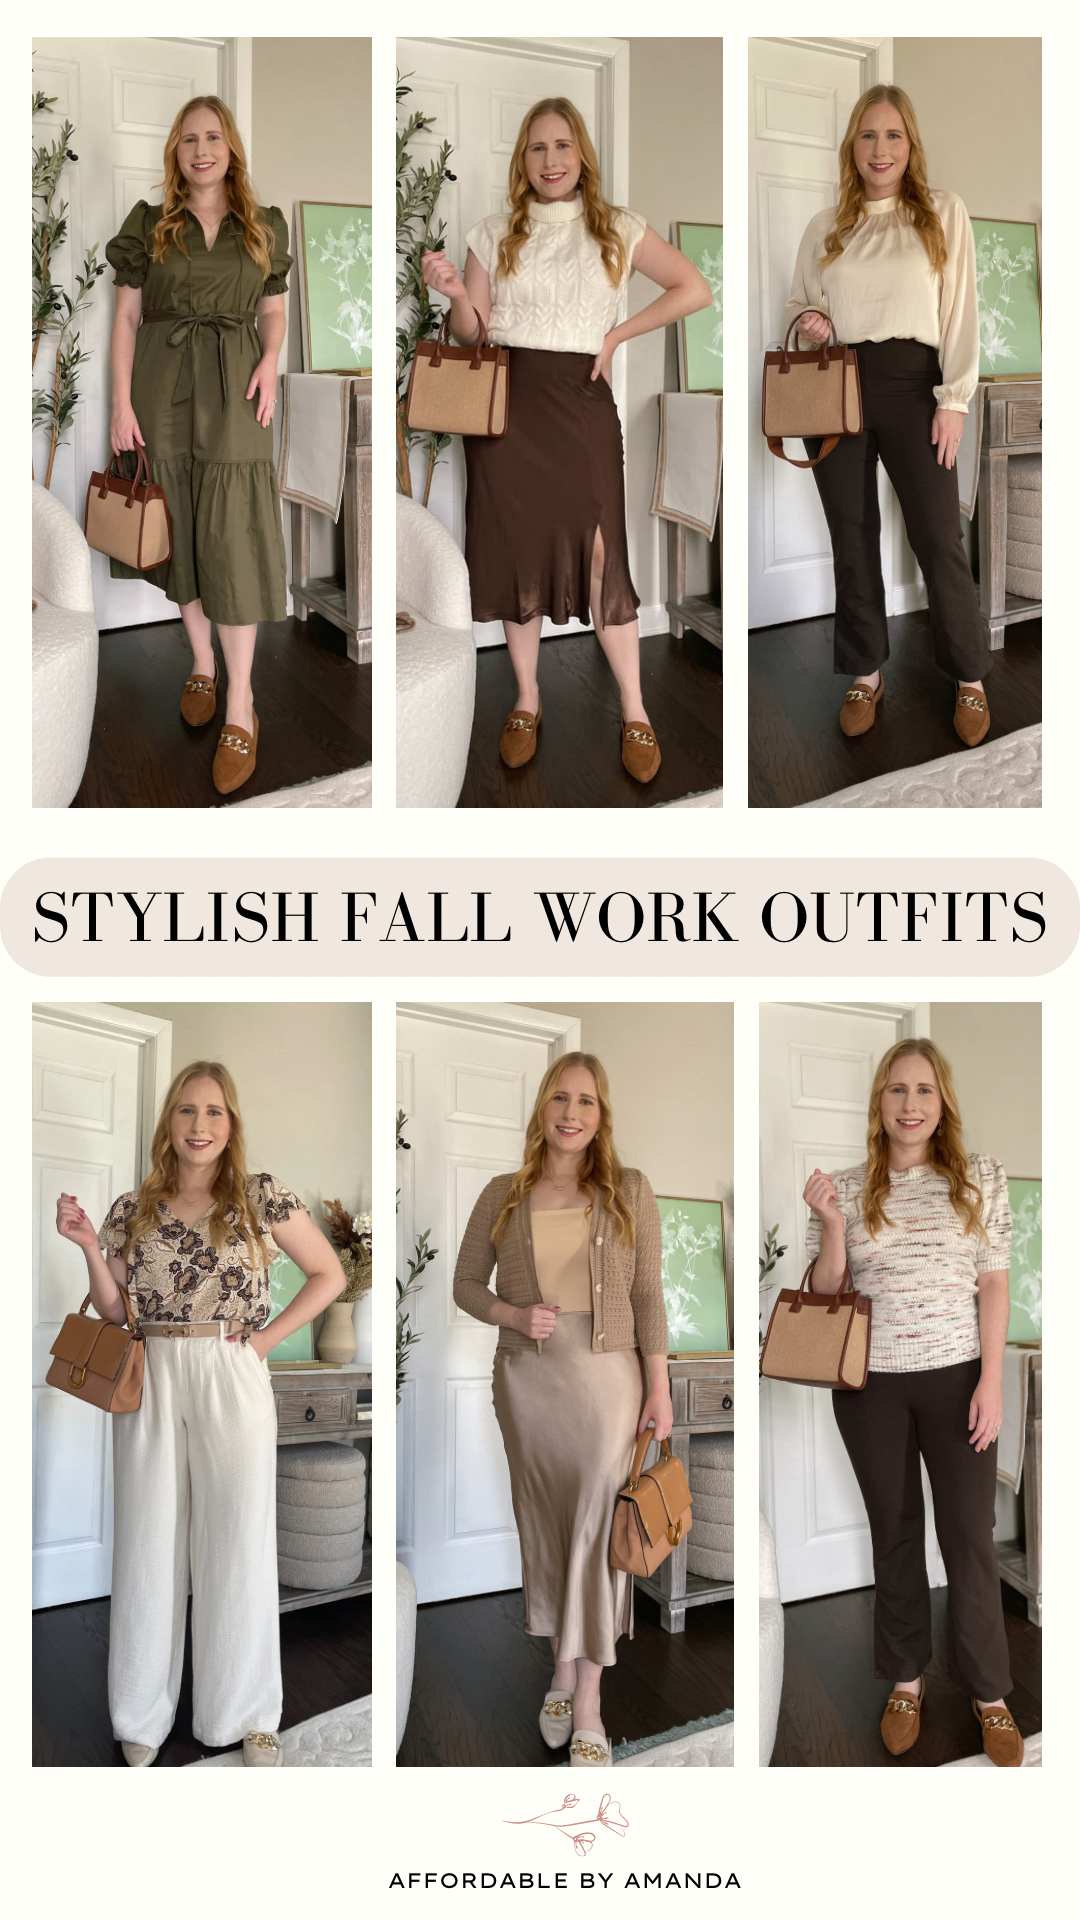 10 Ways To Do Business Casual This Fall